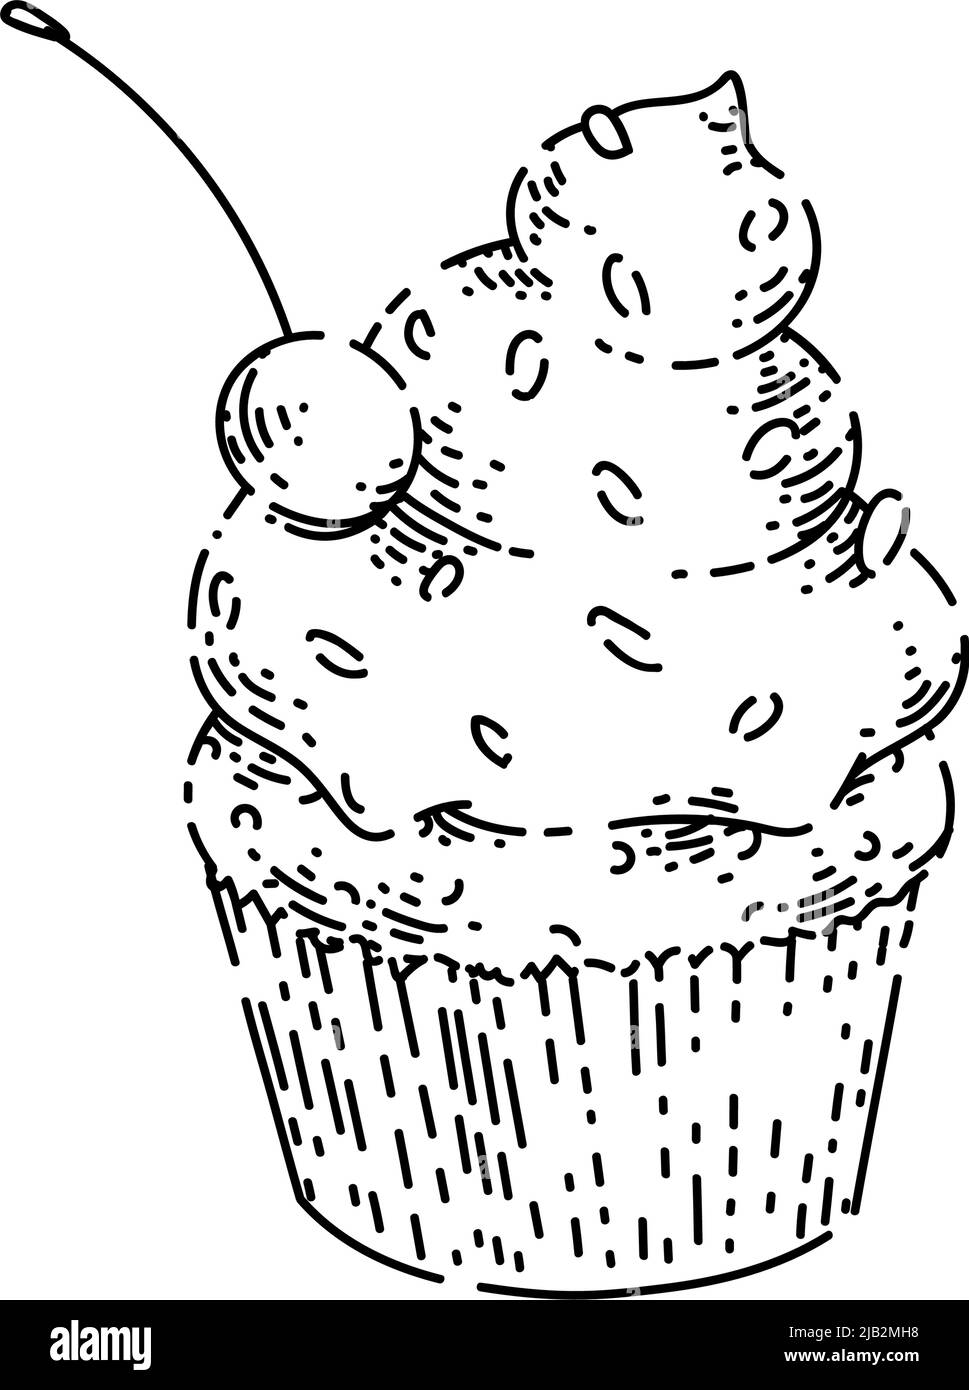 100,000 Cupcake outline Vector Images | Depositphotos